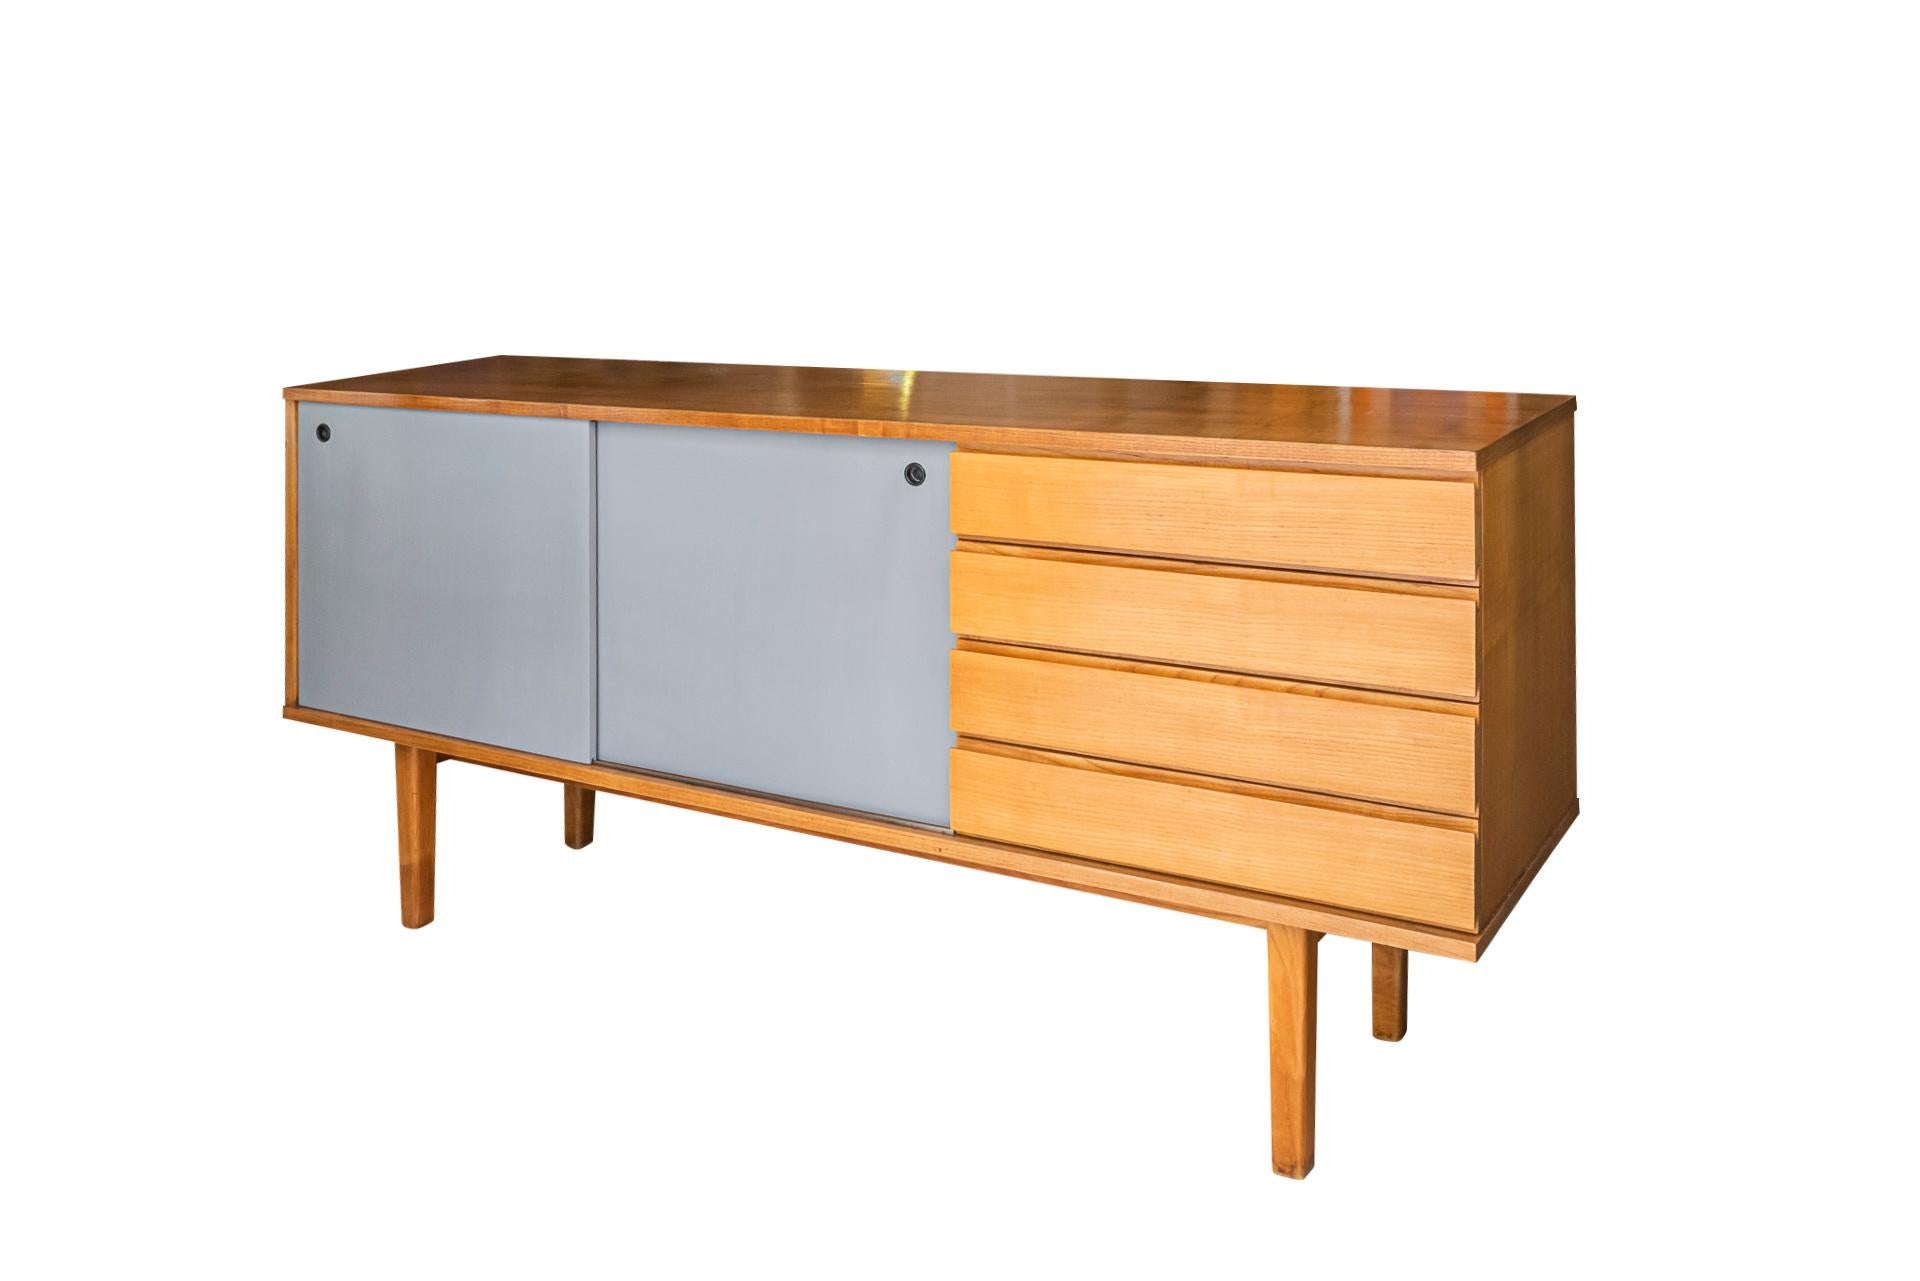 Pierre Guariche,
Sideboard,
Edition Minvielle,
Opening with 4 drawers and 2 lacquered sliding doors, 
Wood,
France, circa 1960.

Measures: 180 x 86 x 46 cm.

The architect Pierre Guariche was one of the leading modern furniture and lighting